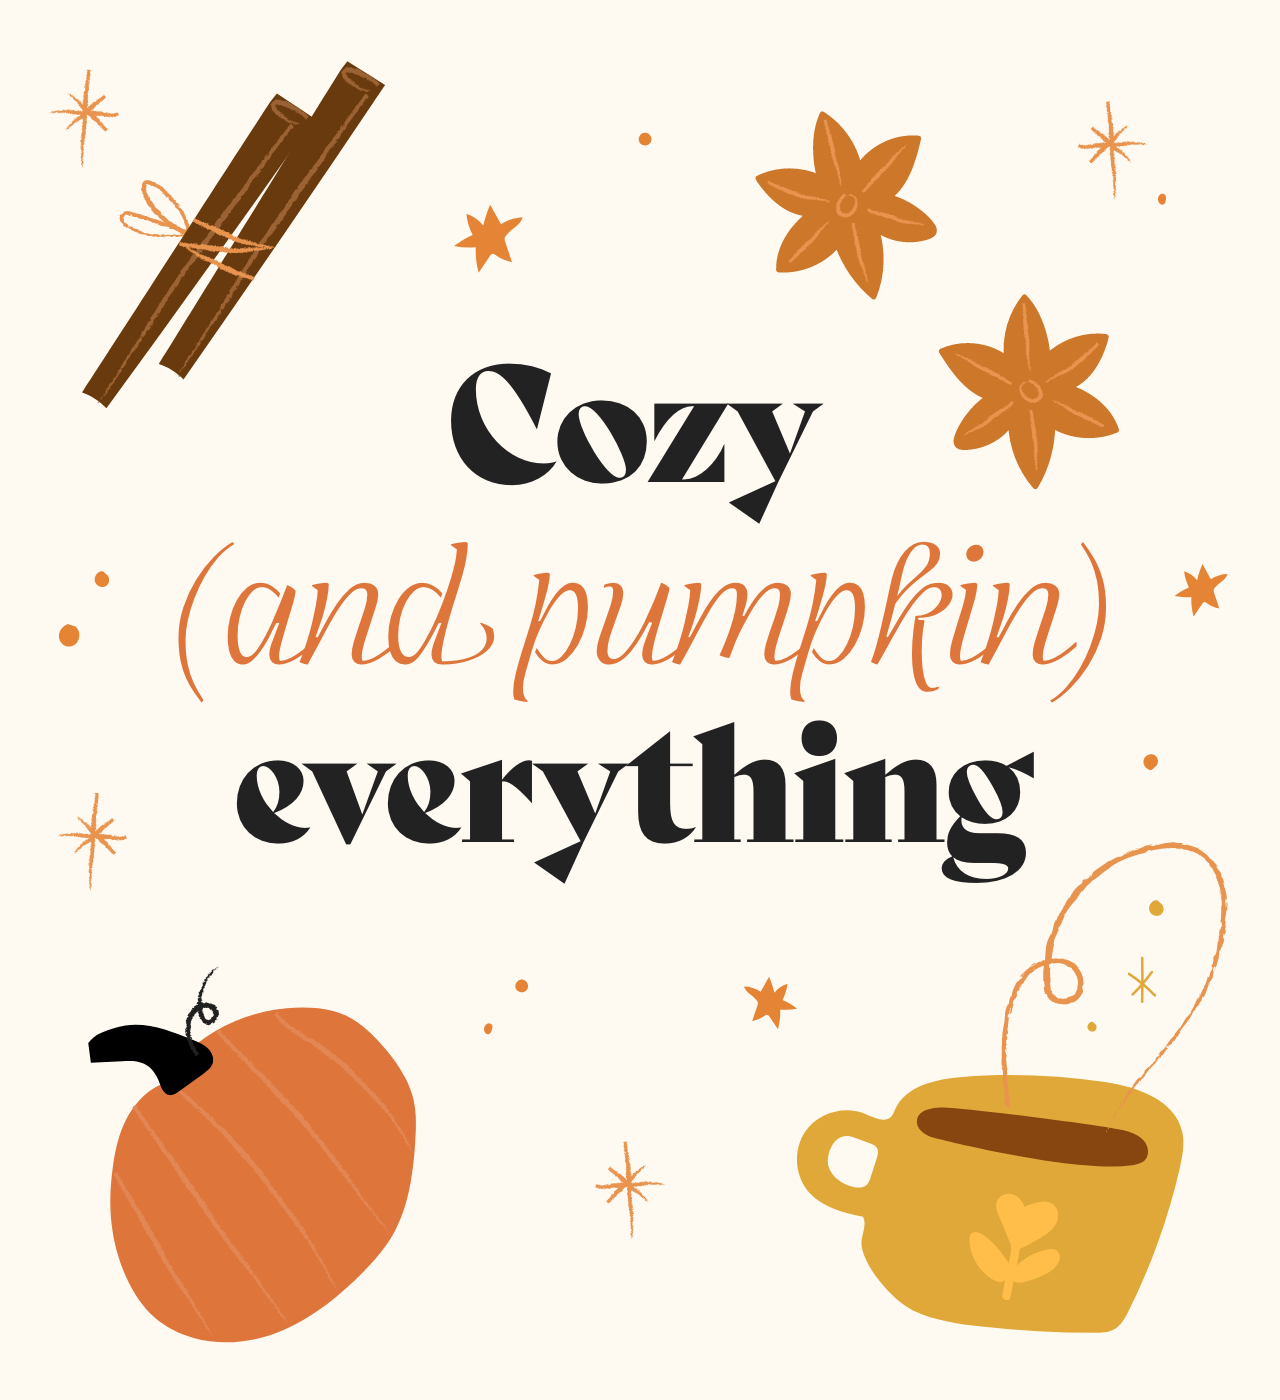 Cozy (and pumpkin) everything